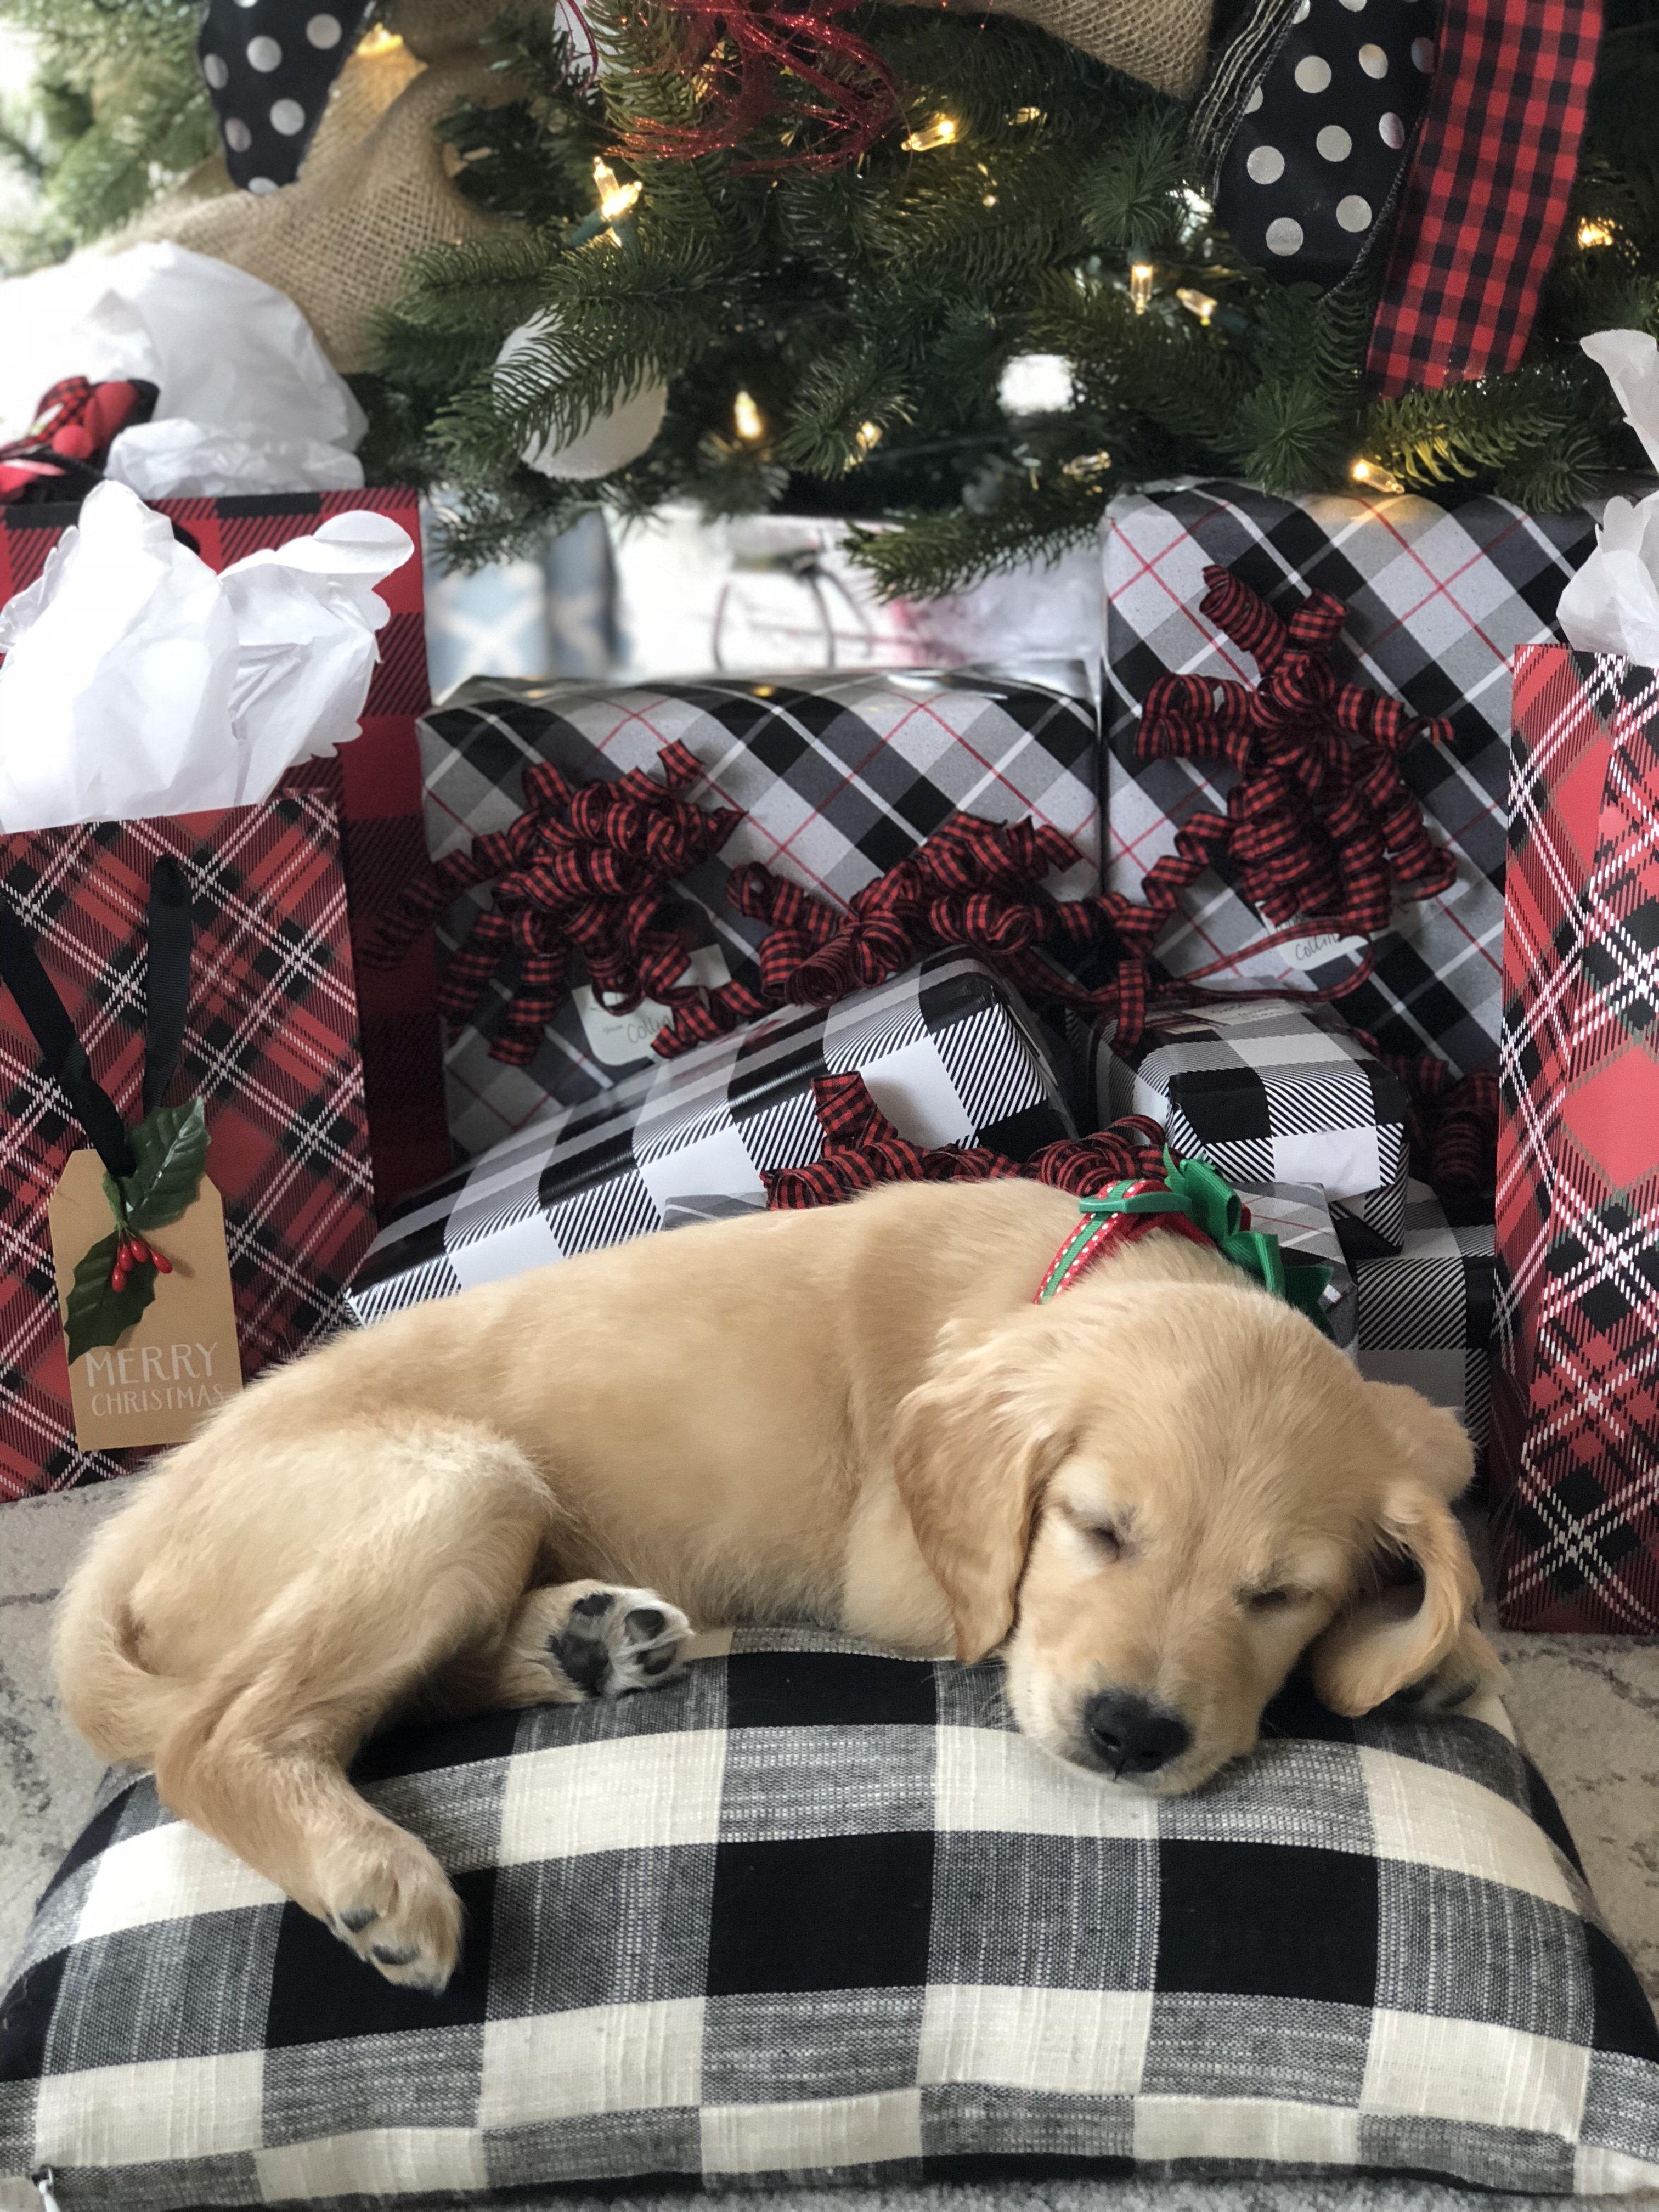 Gifting a Puppy for Christmas: Things to Consider